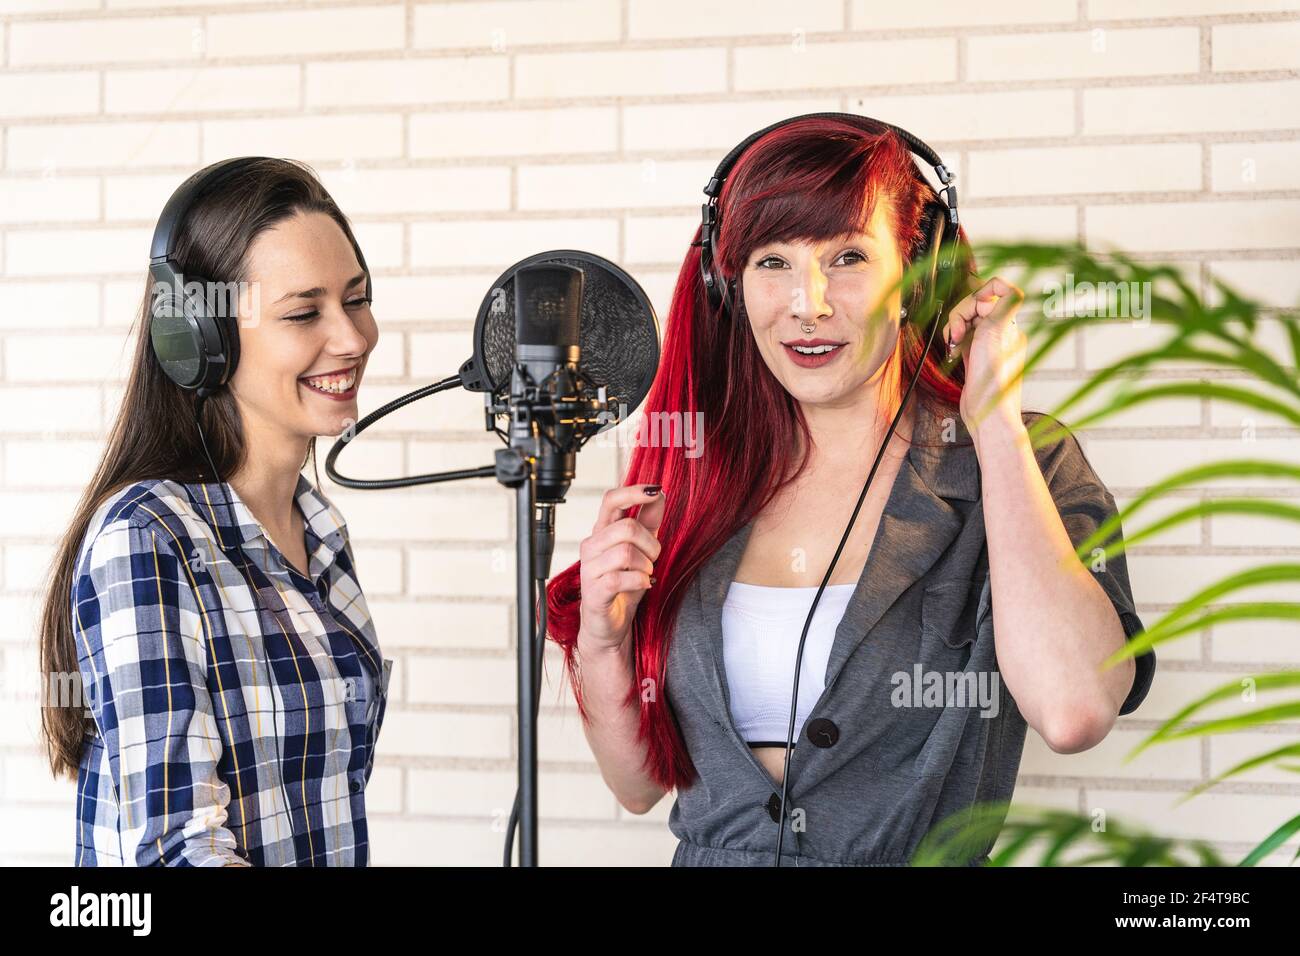 Happy young women with headset standing near microphone and enjoying singing against brick wall and plant Stock Photo